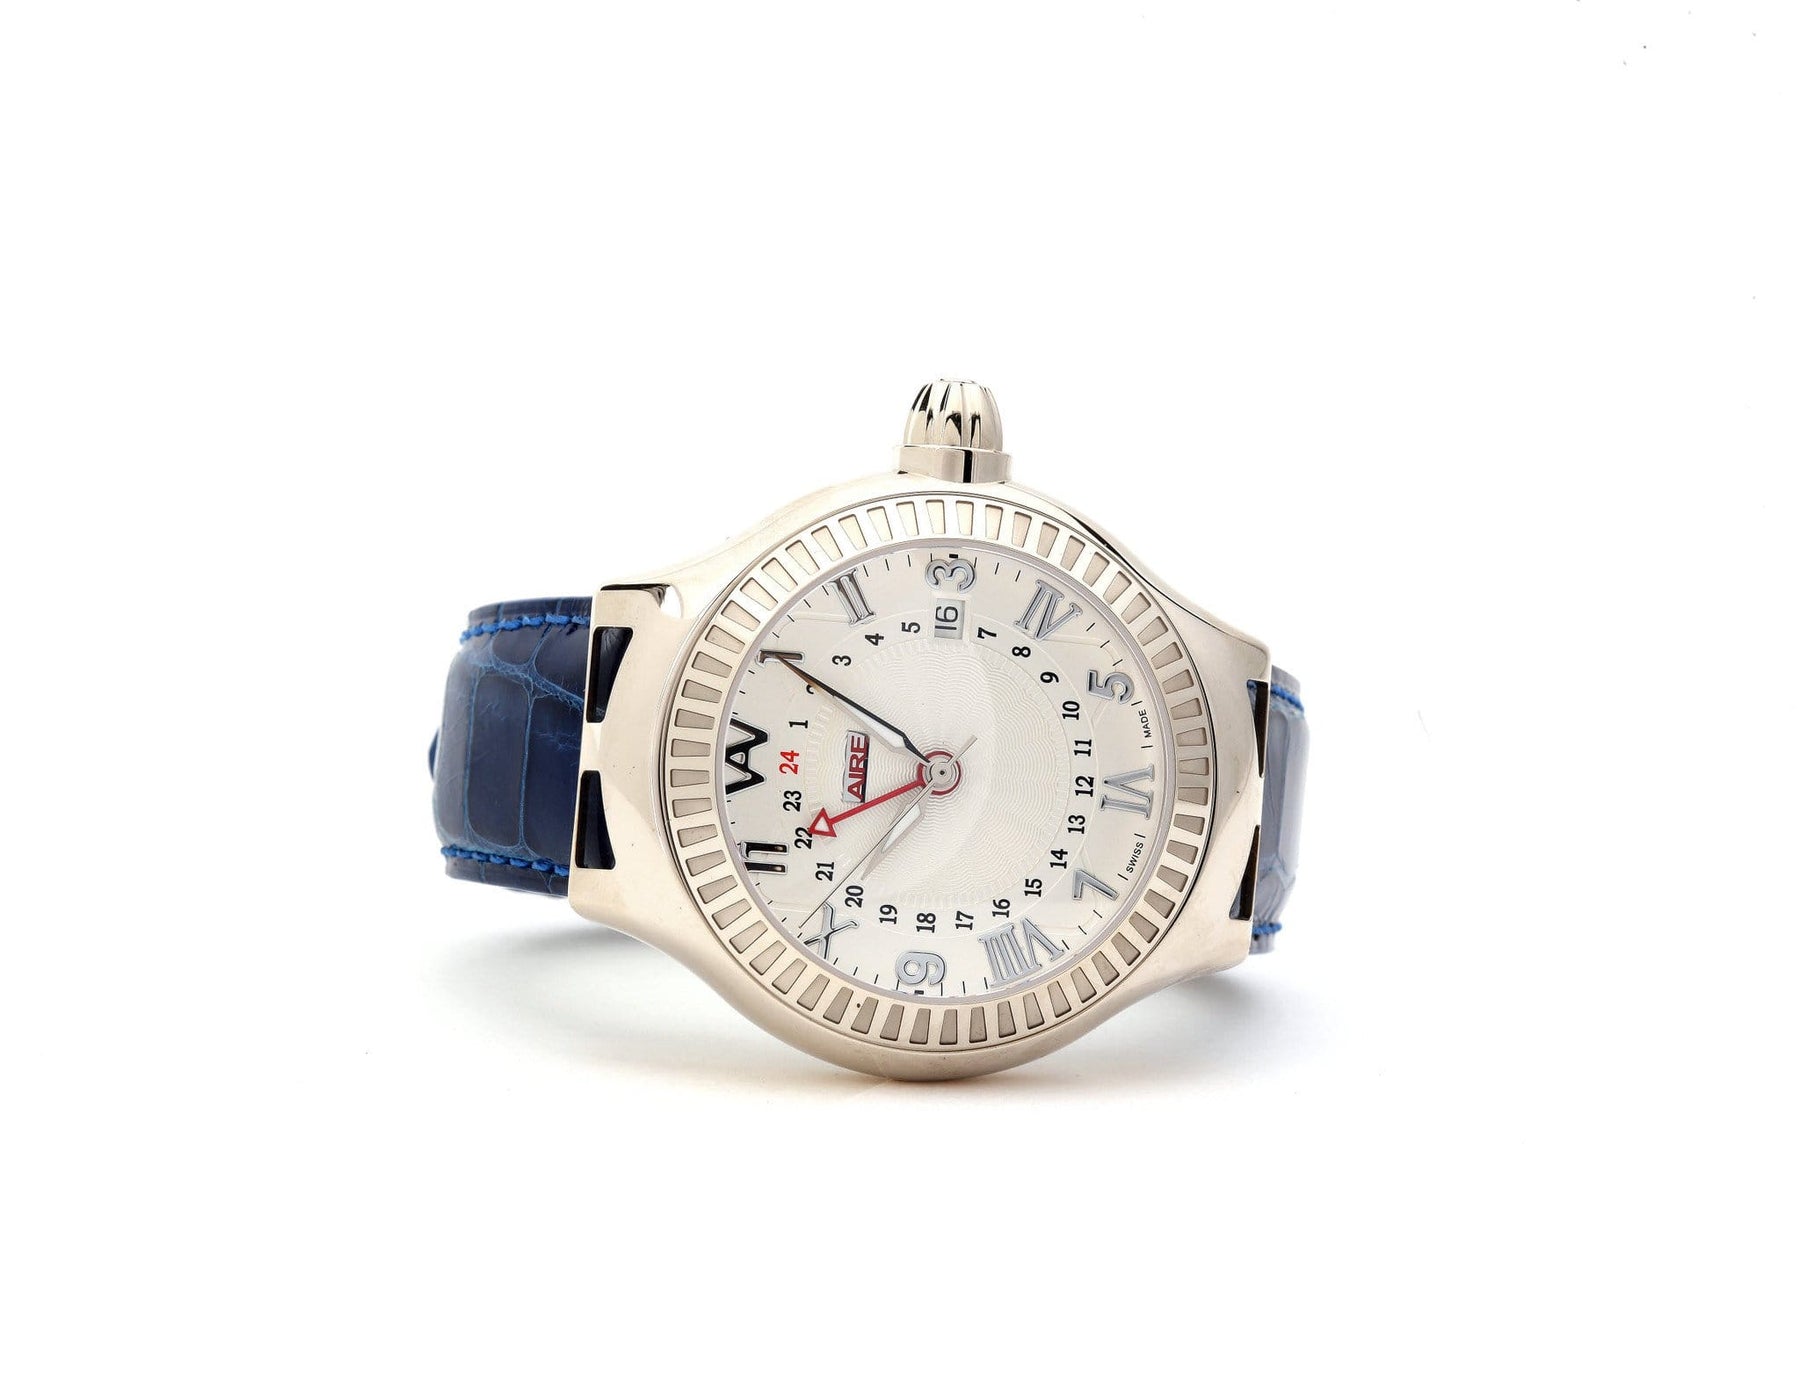 WHITE GOLD WATCH - PARLAY 42 MM GMT Limited Edition - Chris Aire Fine Jewelry & Timepieces